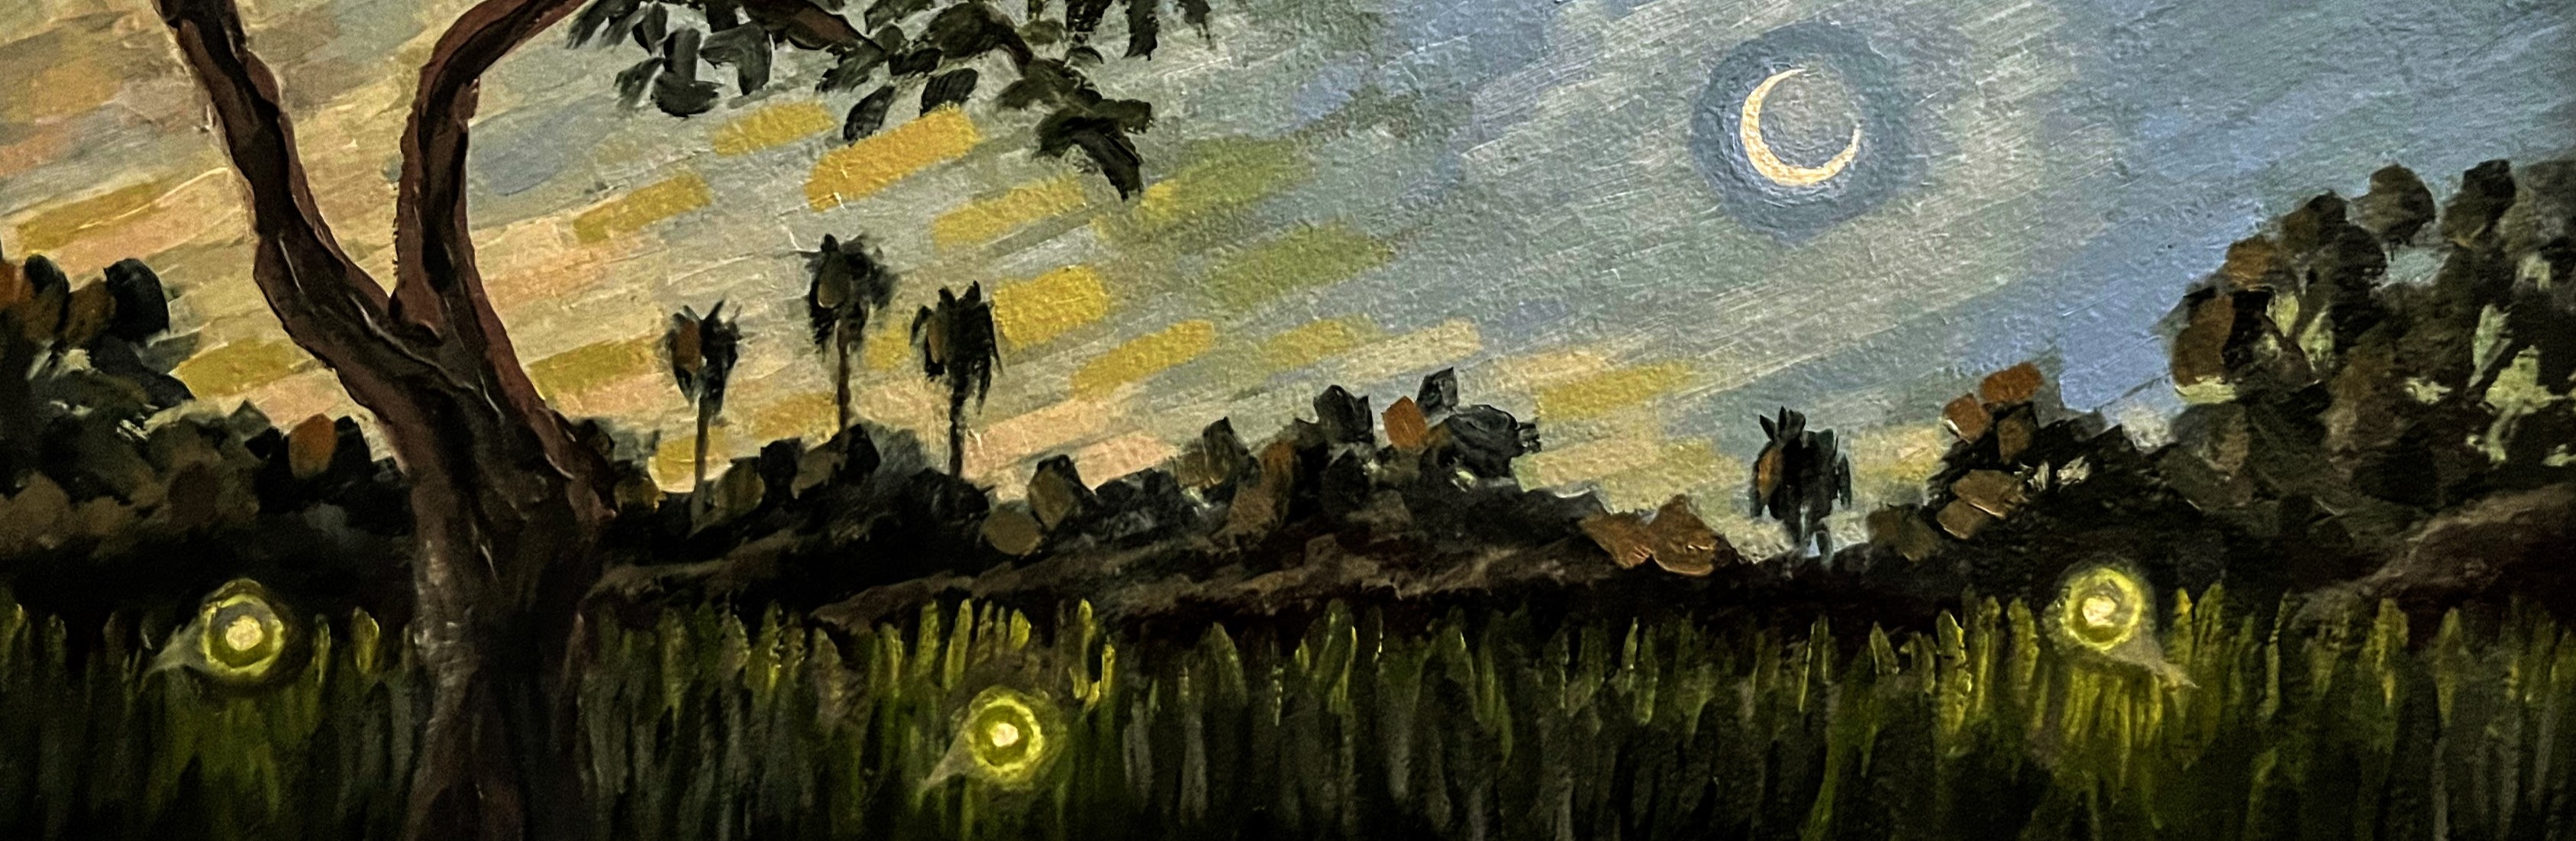 Painting of fireflies at dusk